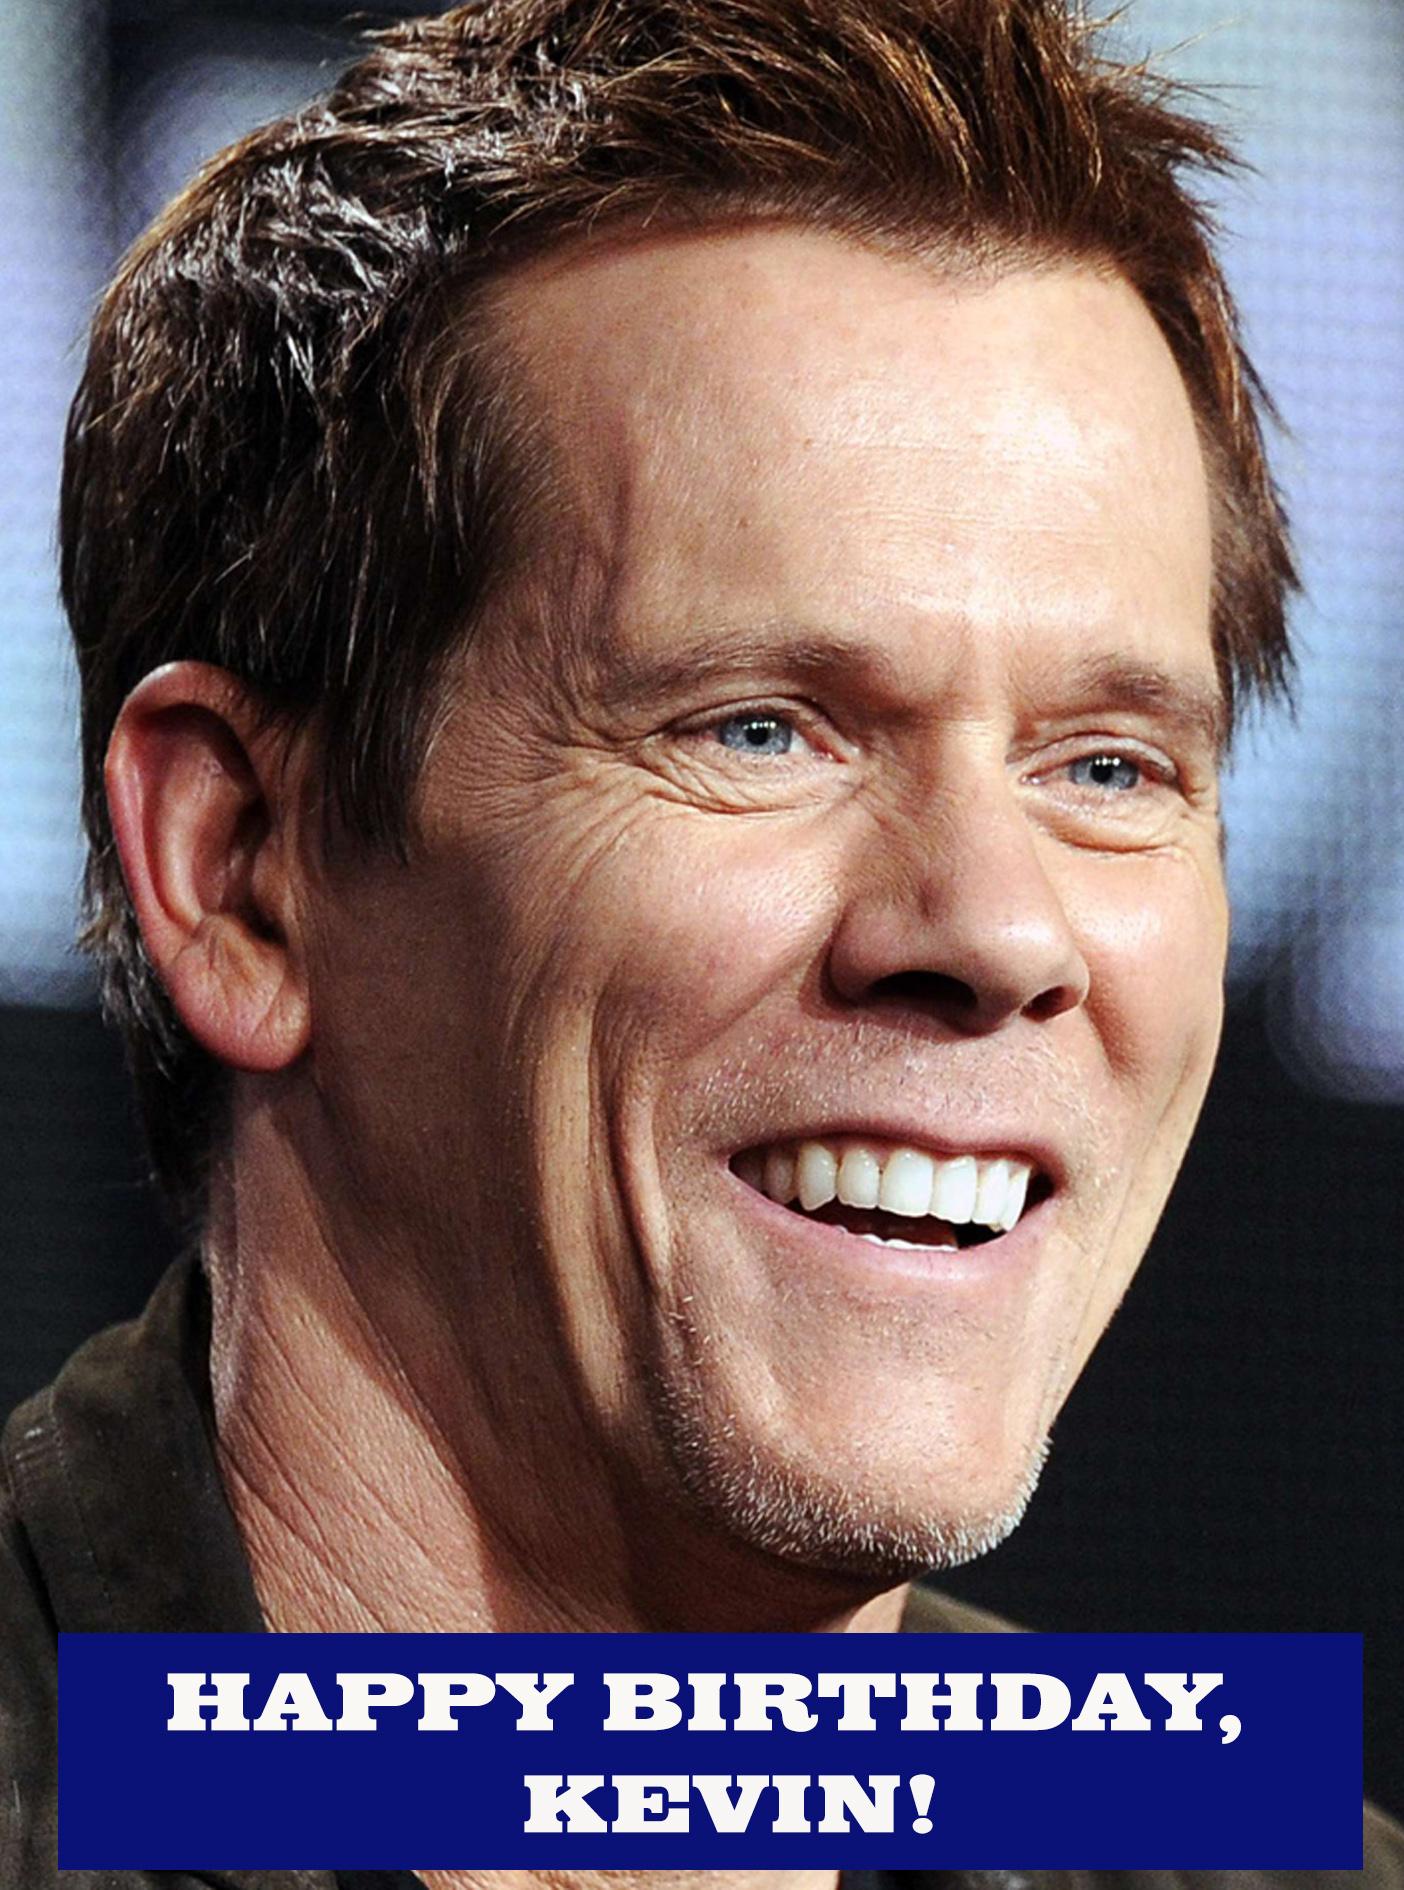 Movie Loft wishing a Happy Birthday to Kevin Bacon, all Six Degrees of him. 